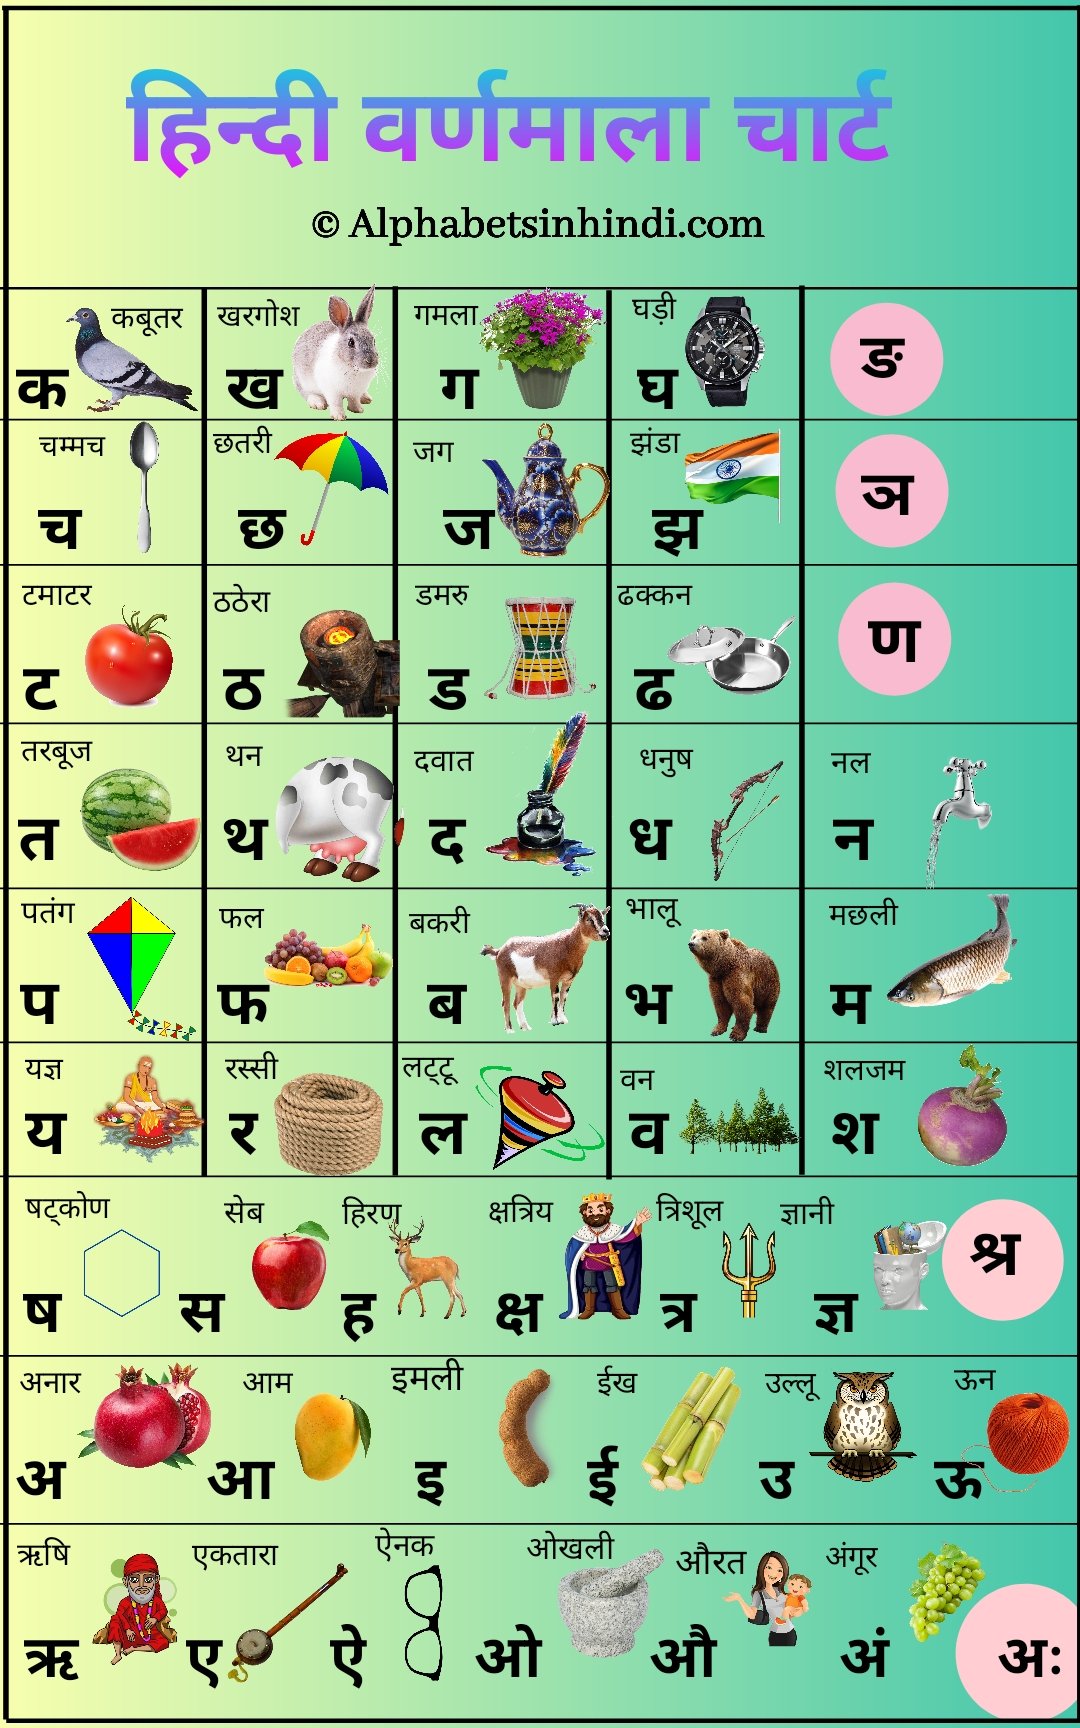 A AA E EE Hindi Alphabets With Pictures And Text